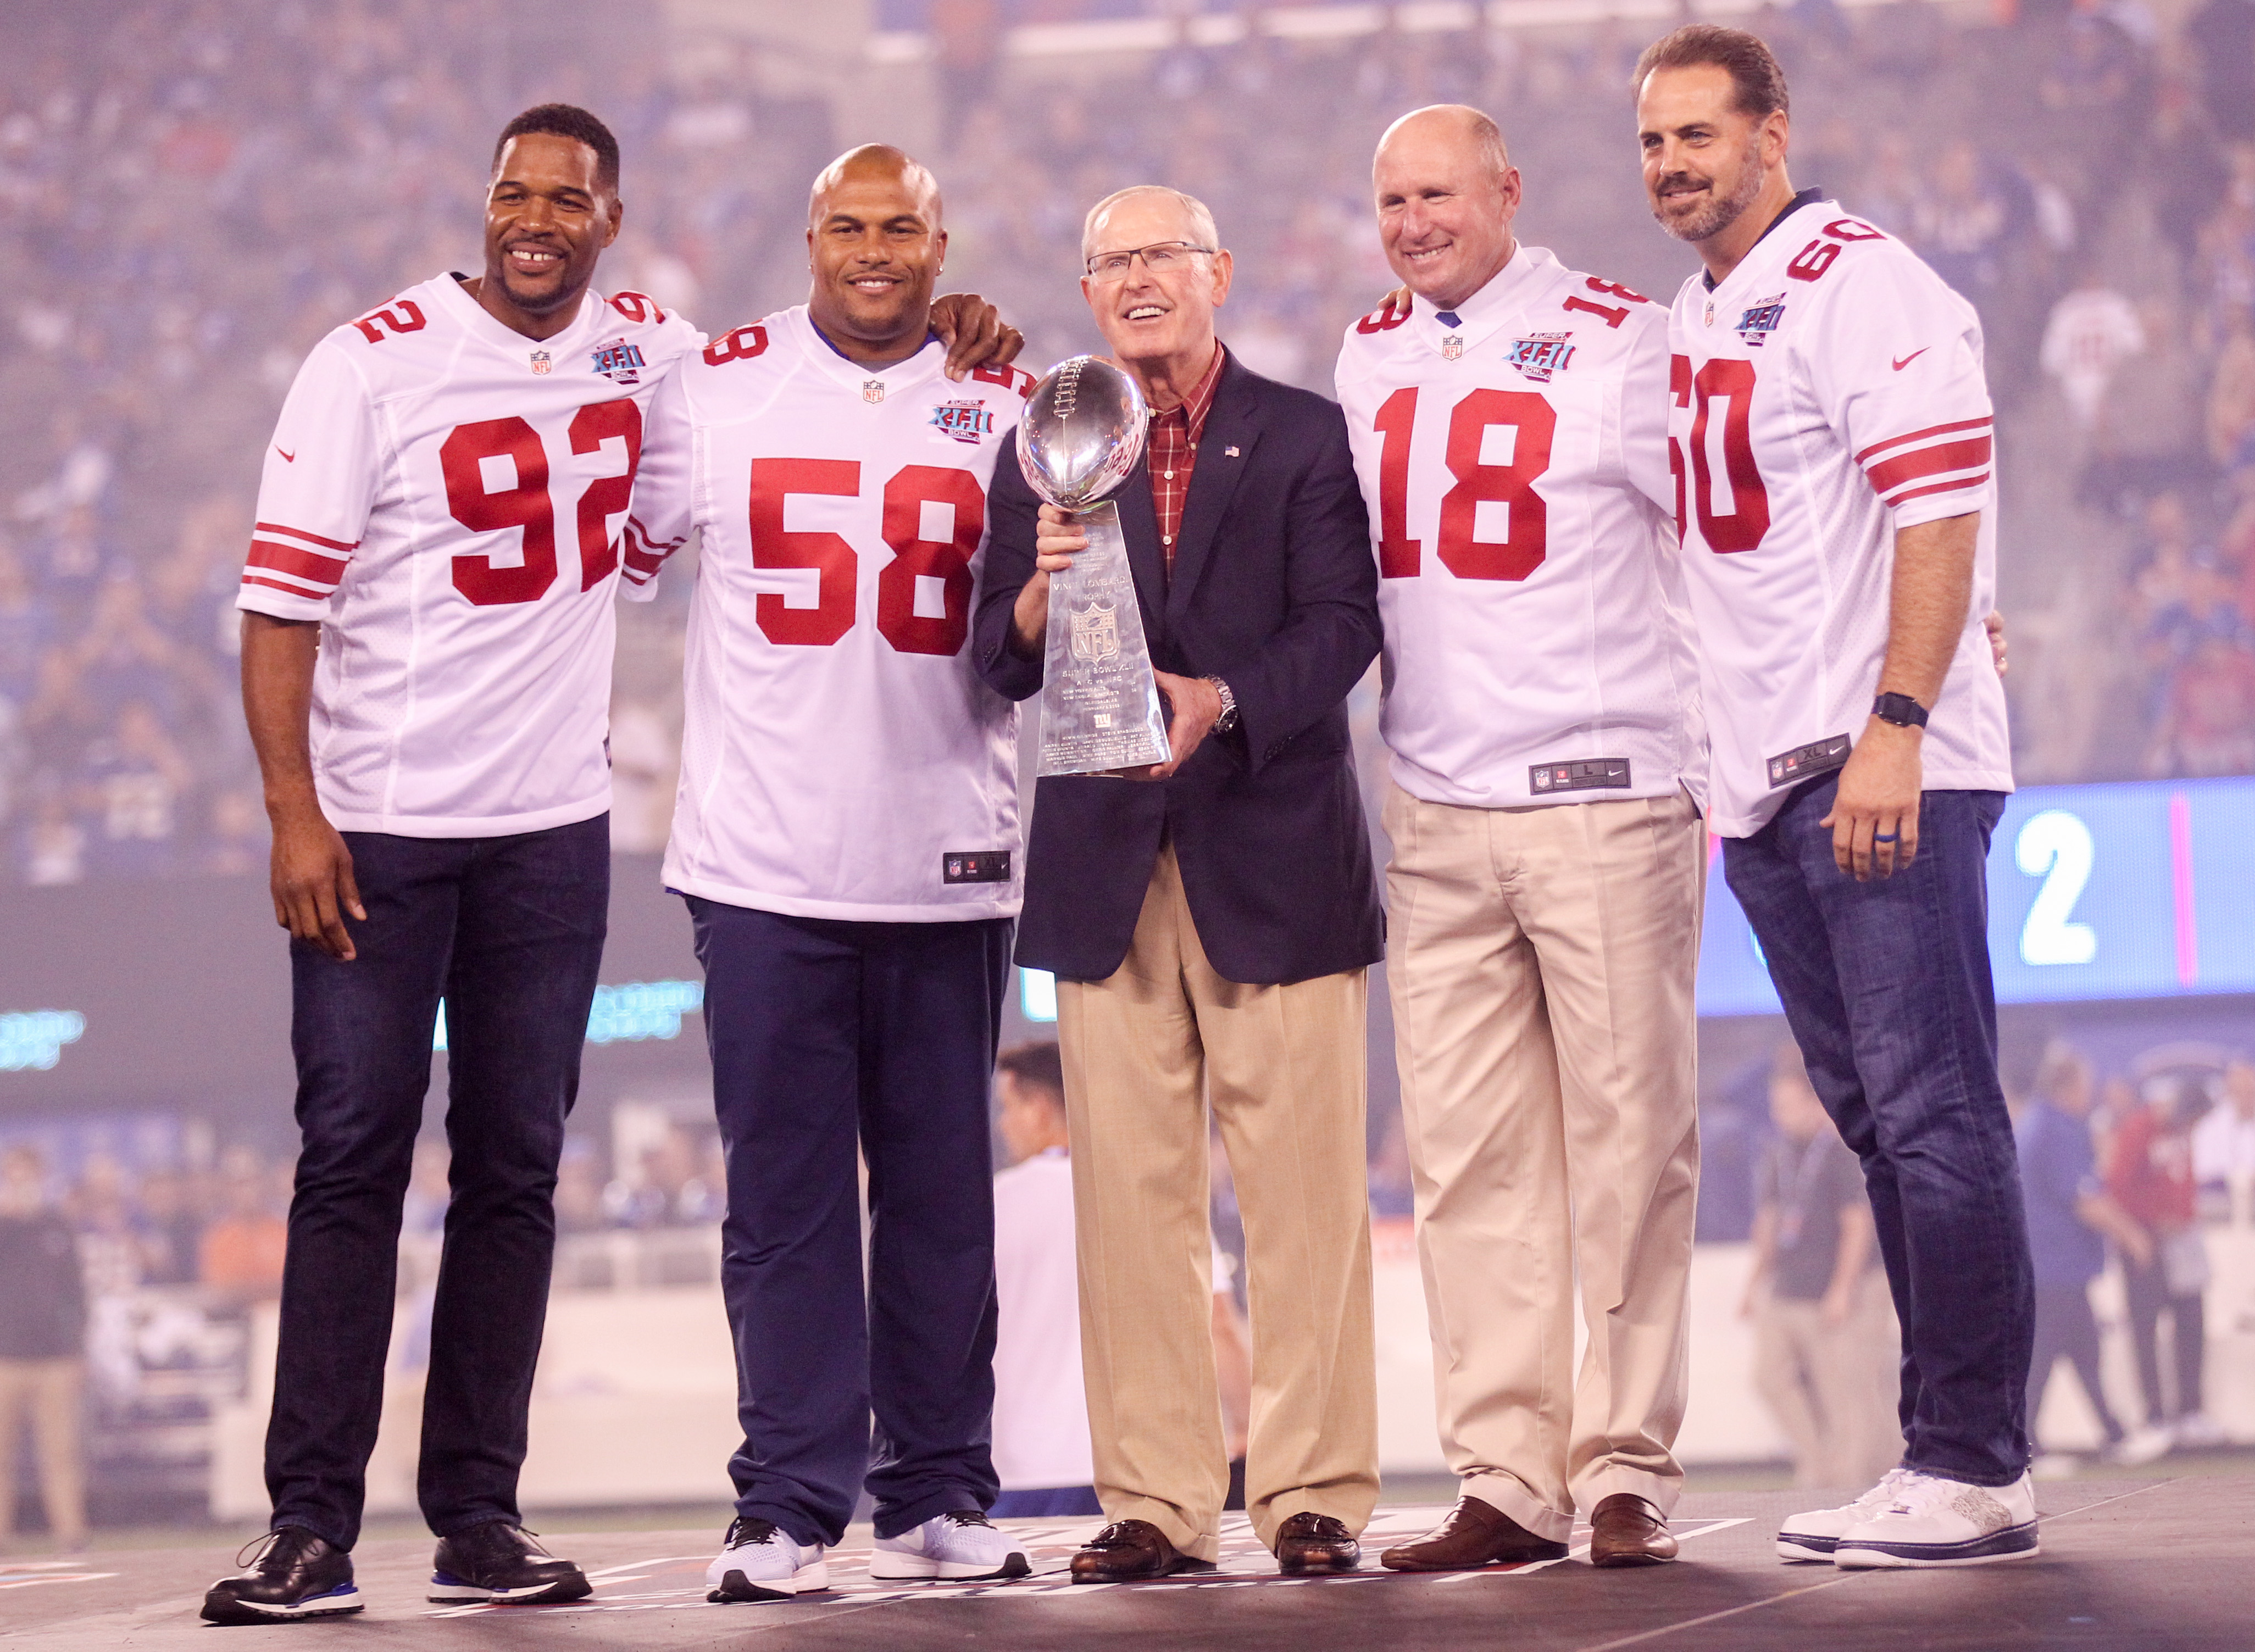 The 2007 captains of the New York Giants (l to r): Michael Strahan, Antonio Pierce, head coach Tom Coughlin, Jeff Feagles, and Shaun O'Hara take the stage with the Vince Lombardi Trophy as the Giants celebrate the 10-year anniversary of their win over the New England Patriots in Super Bowl XLII during a ceremony at halftime of the Detroit Lions game on Monday Night Football. (2017 file photo by Andrew Mills | NJ Advance Media)